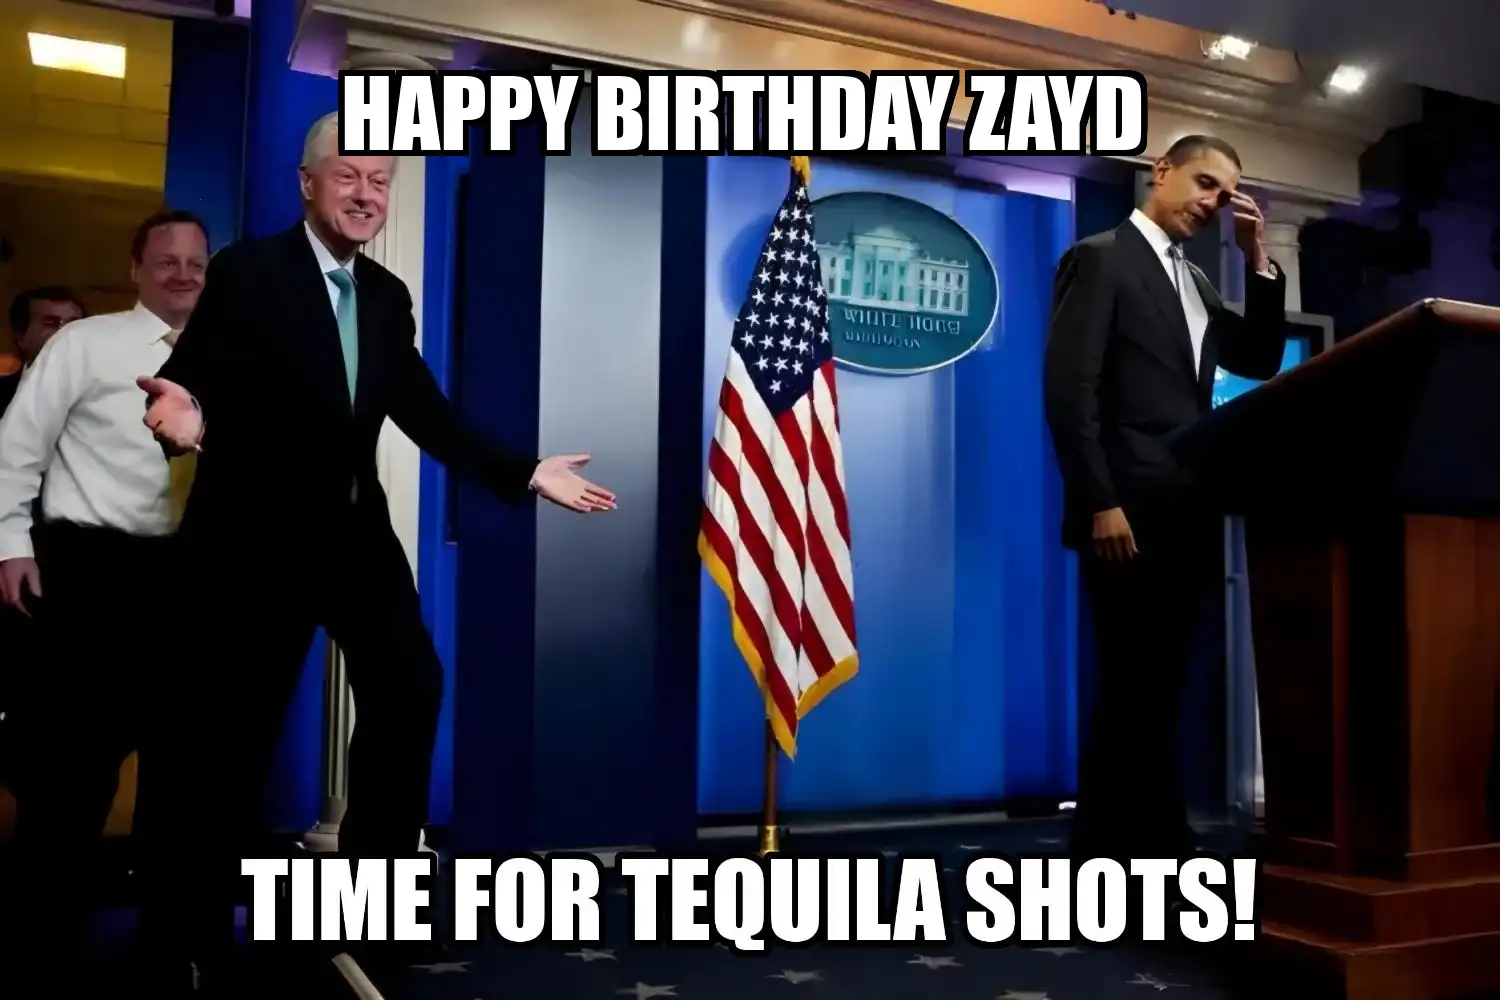 Happy Birthday Zayd Time For Tequila Shots Memes